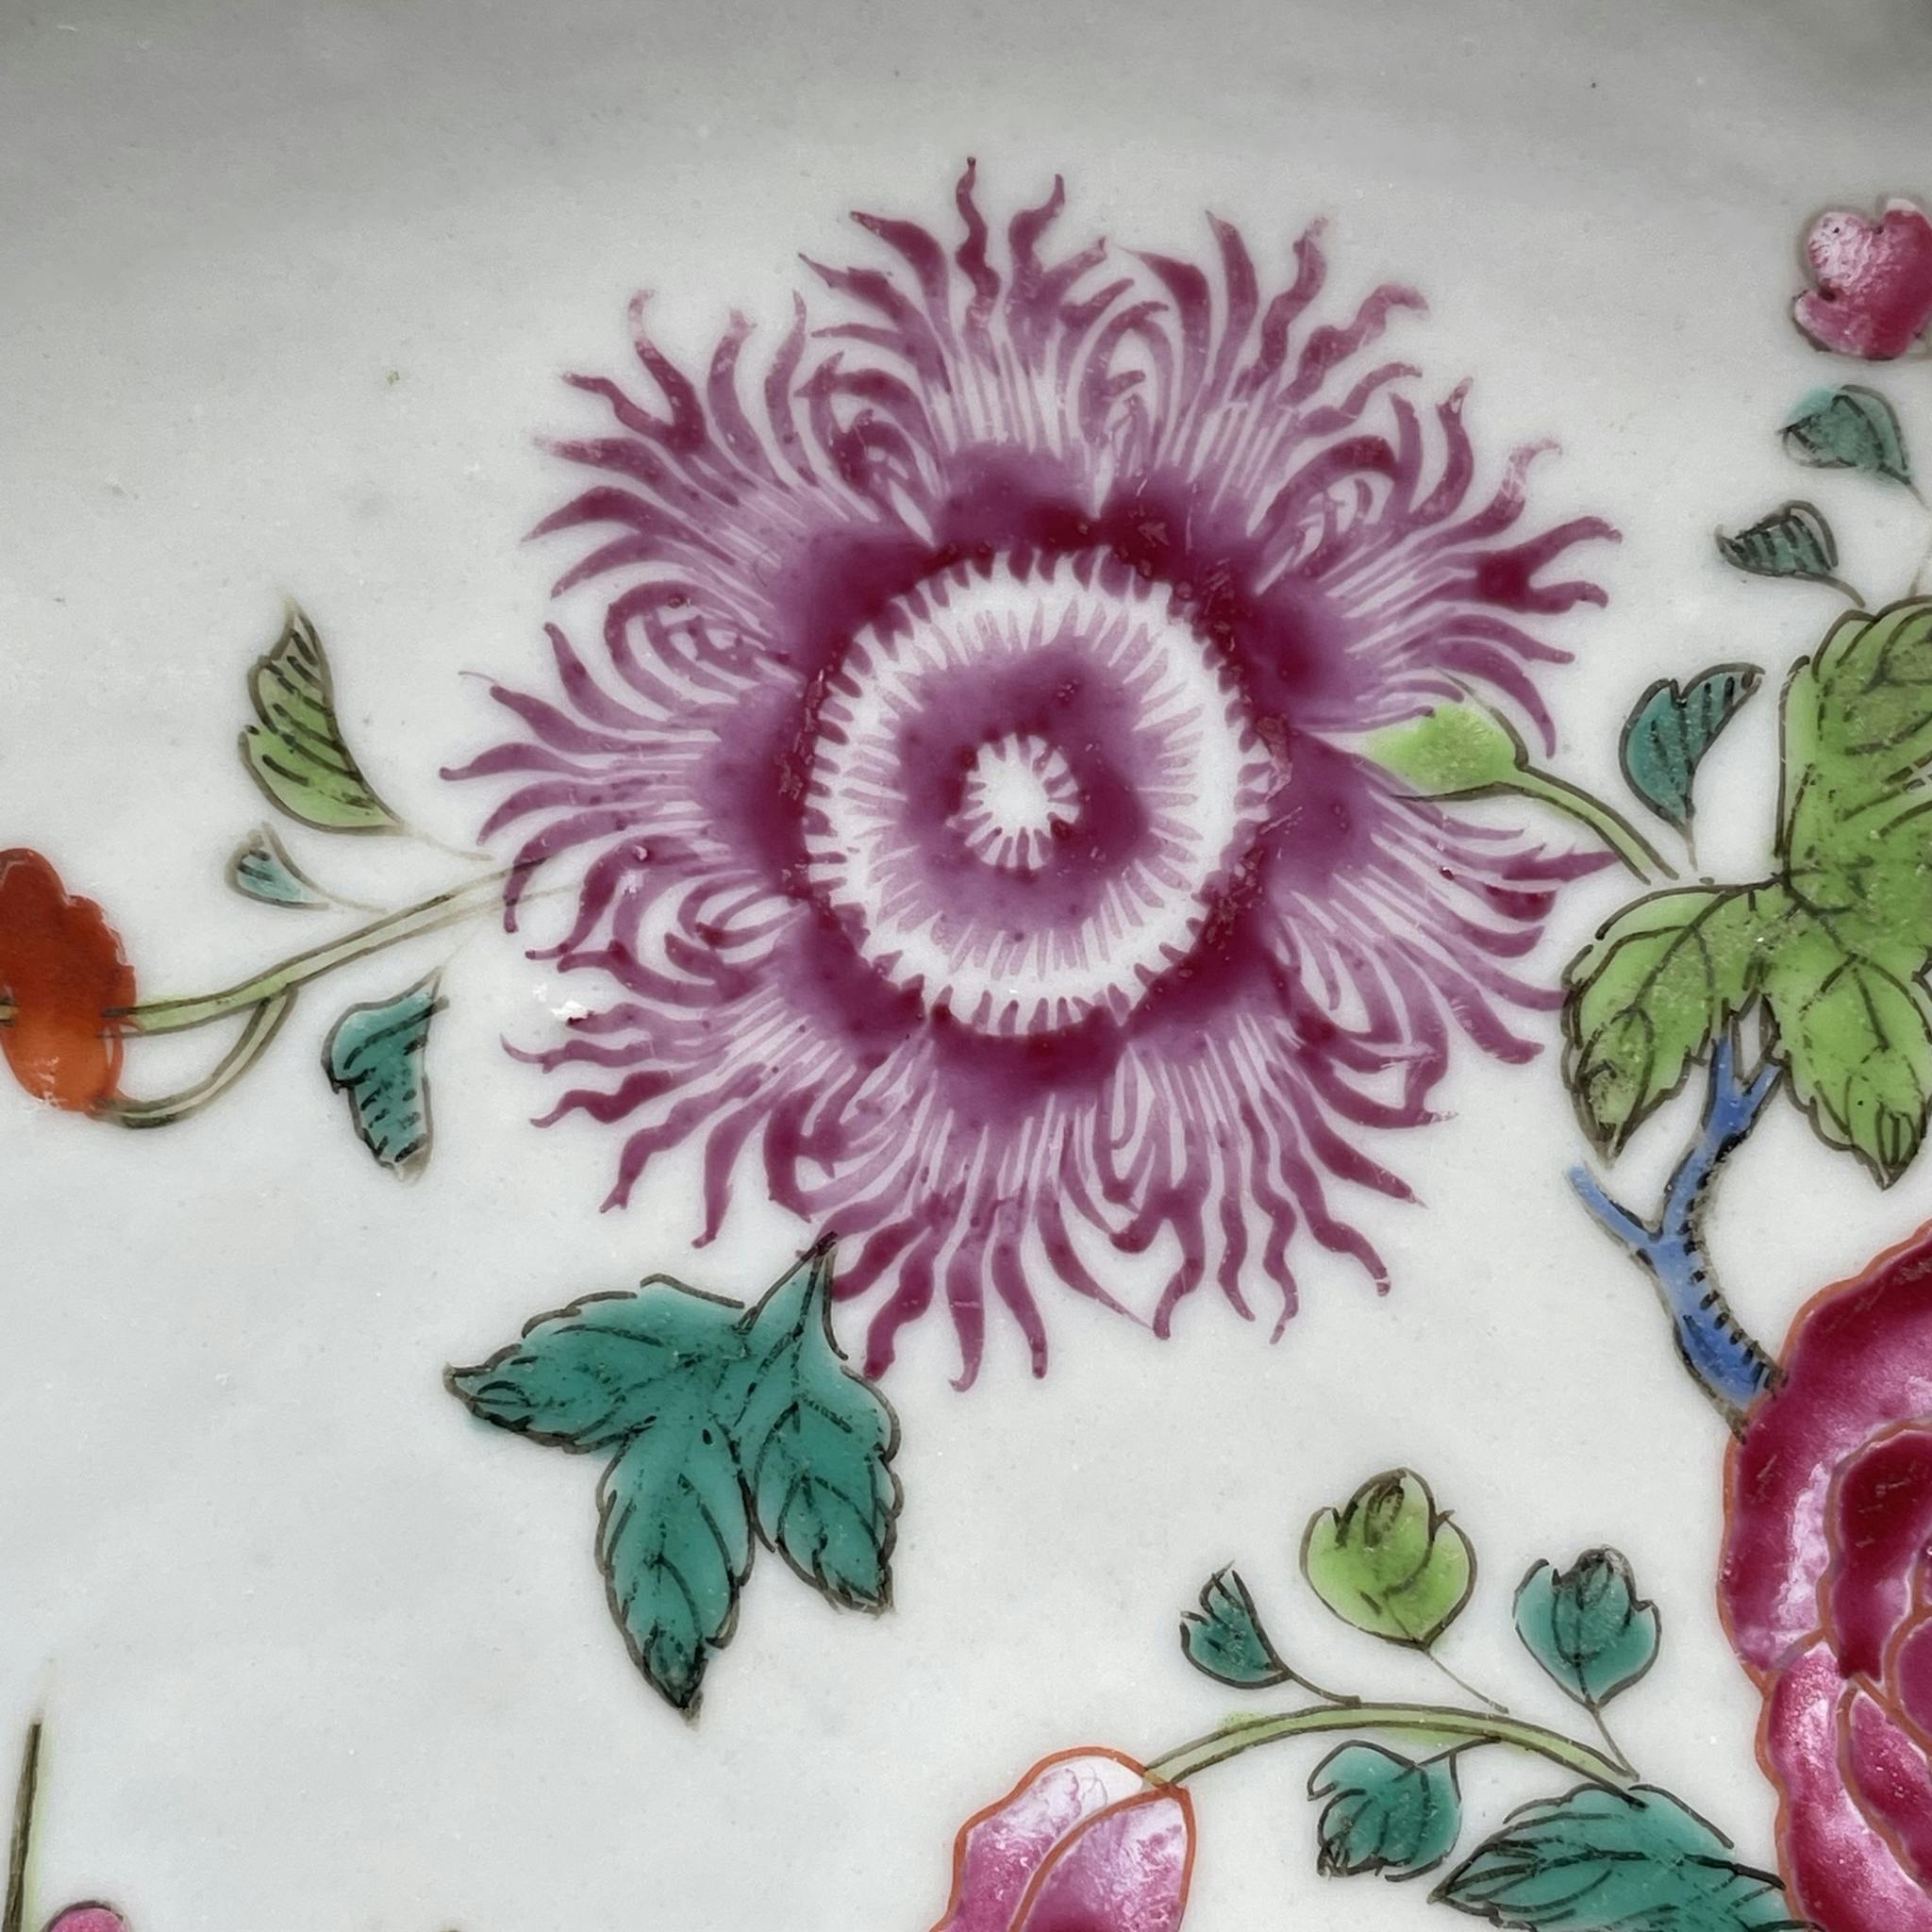 Antique Chinese famille rose plate, Qianlong, 18th c #1395